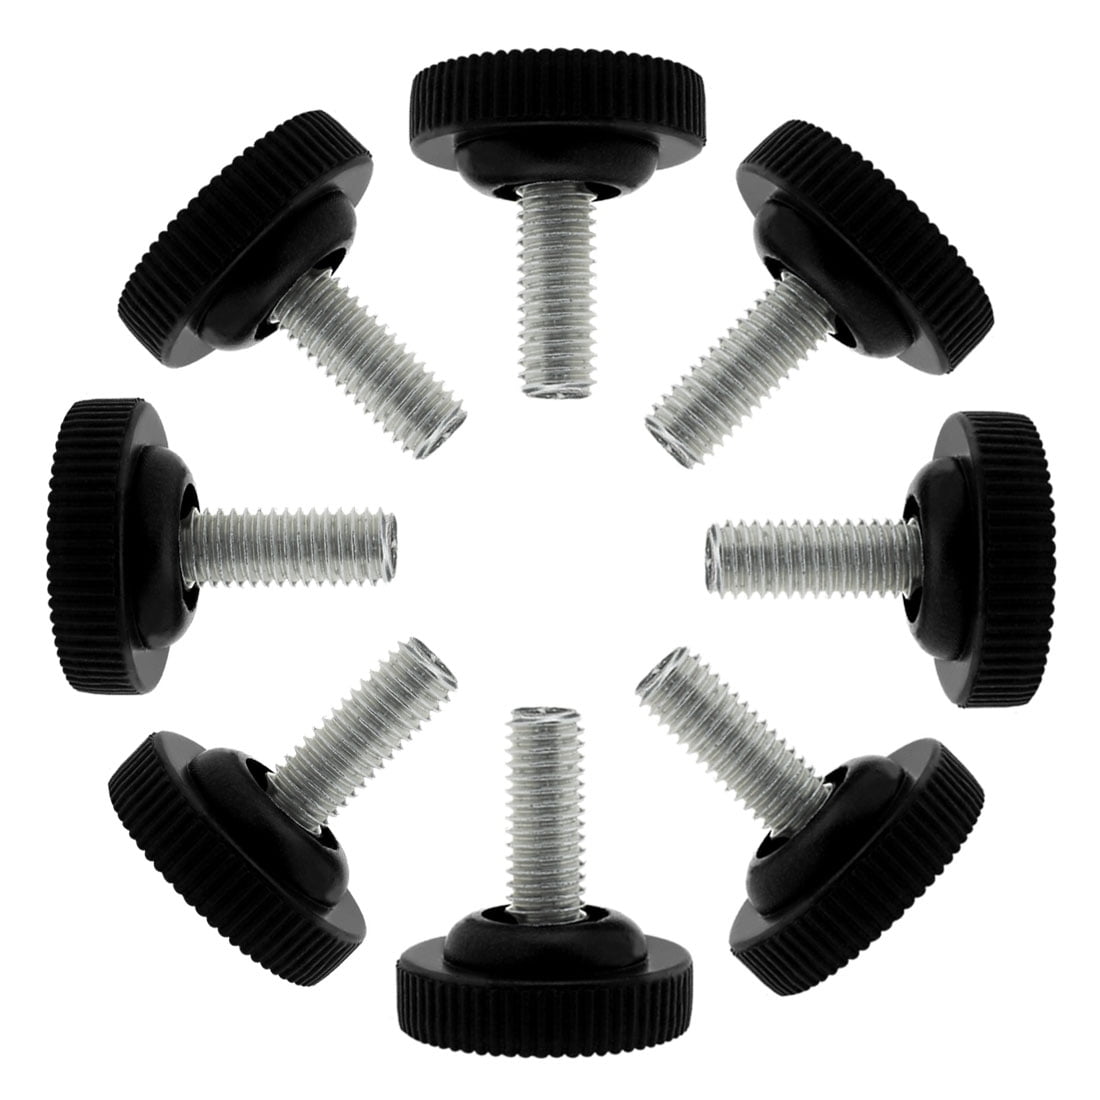 M8 x 20 x 38mm Leveling Feet Adjustable Leveler Protector for Chair Leg 8pcs 